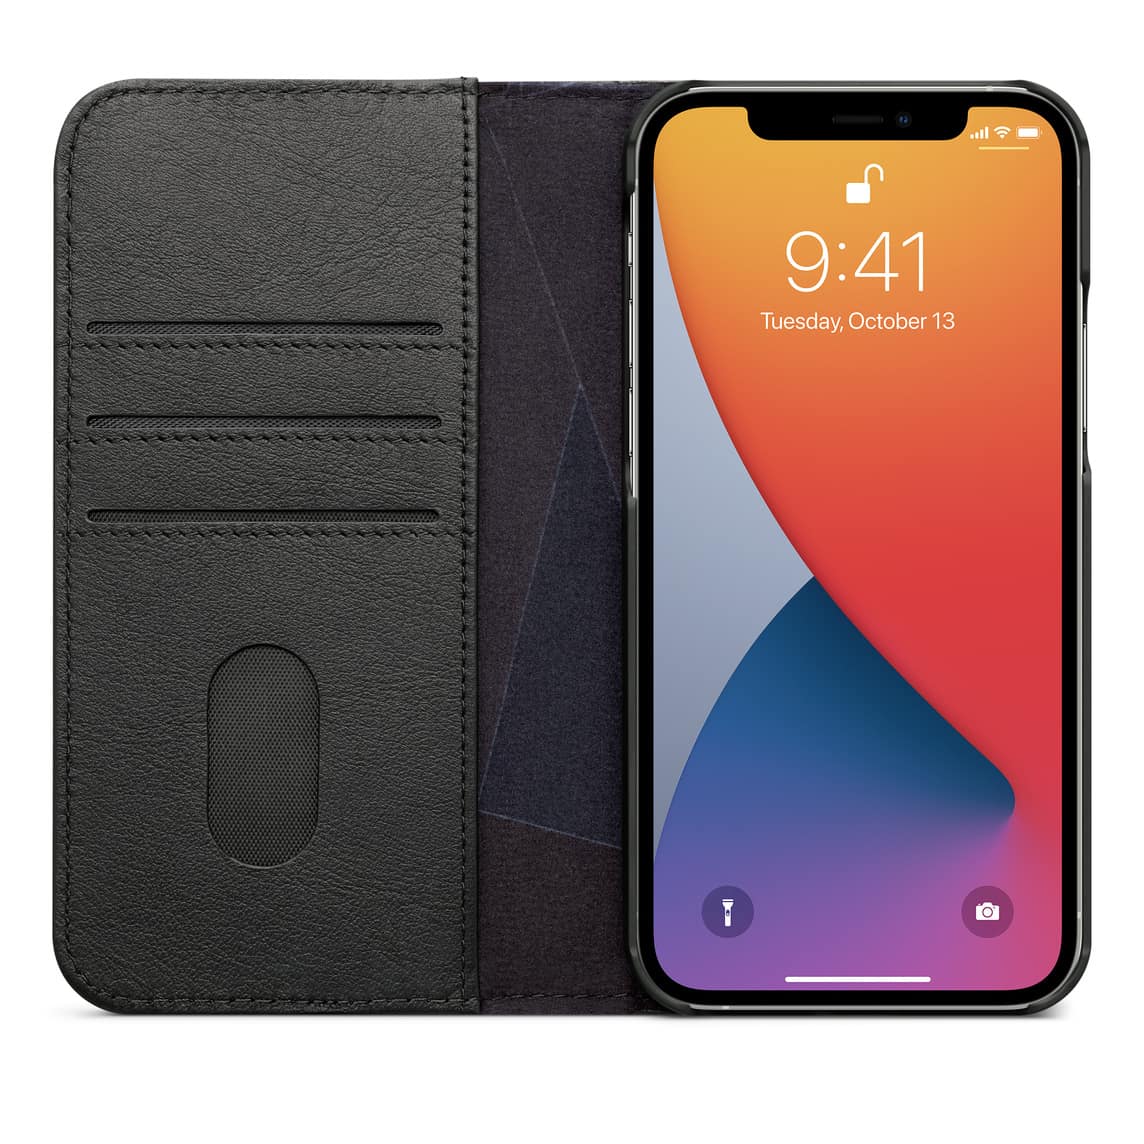 The Wallet Case